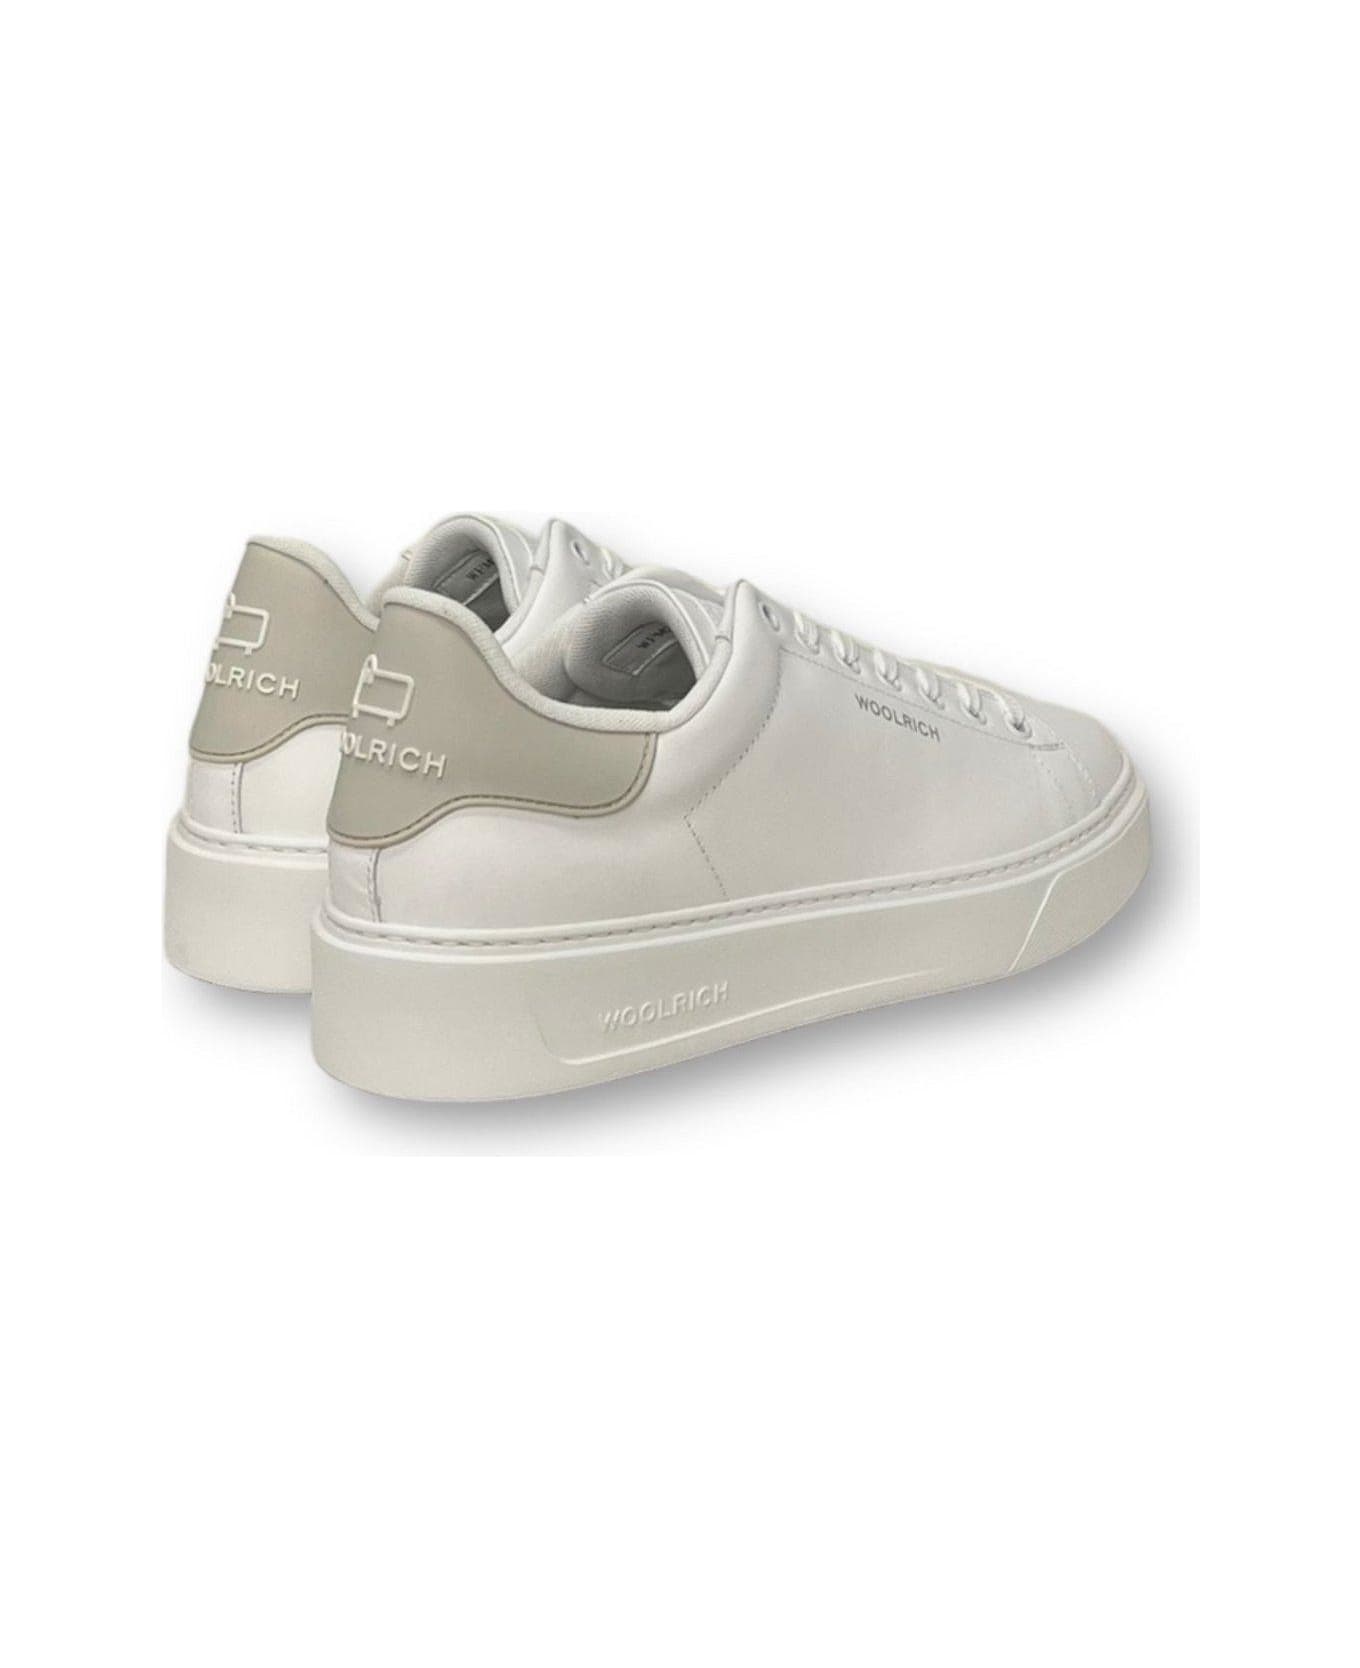 Woolrich Round Toe Lace-up Sneakers - WHITE スニーカー